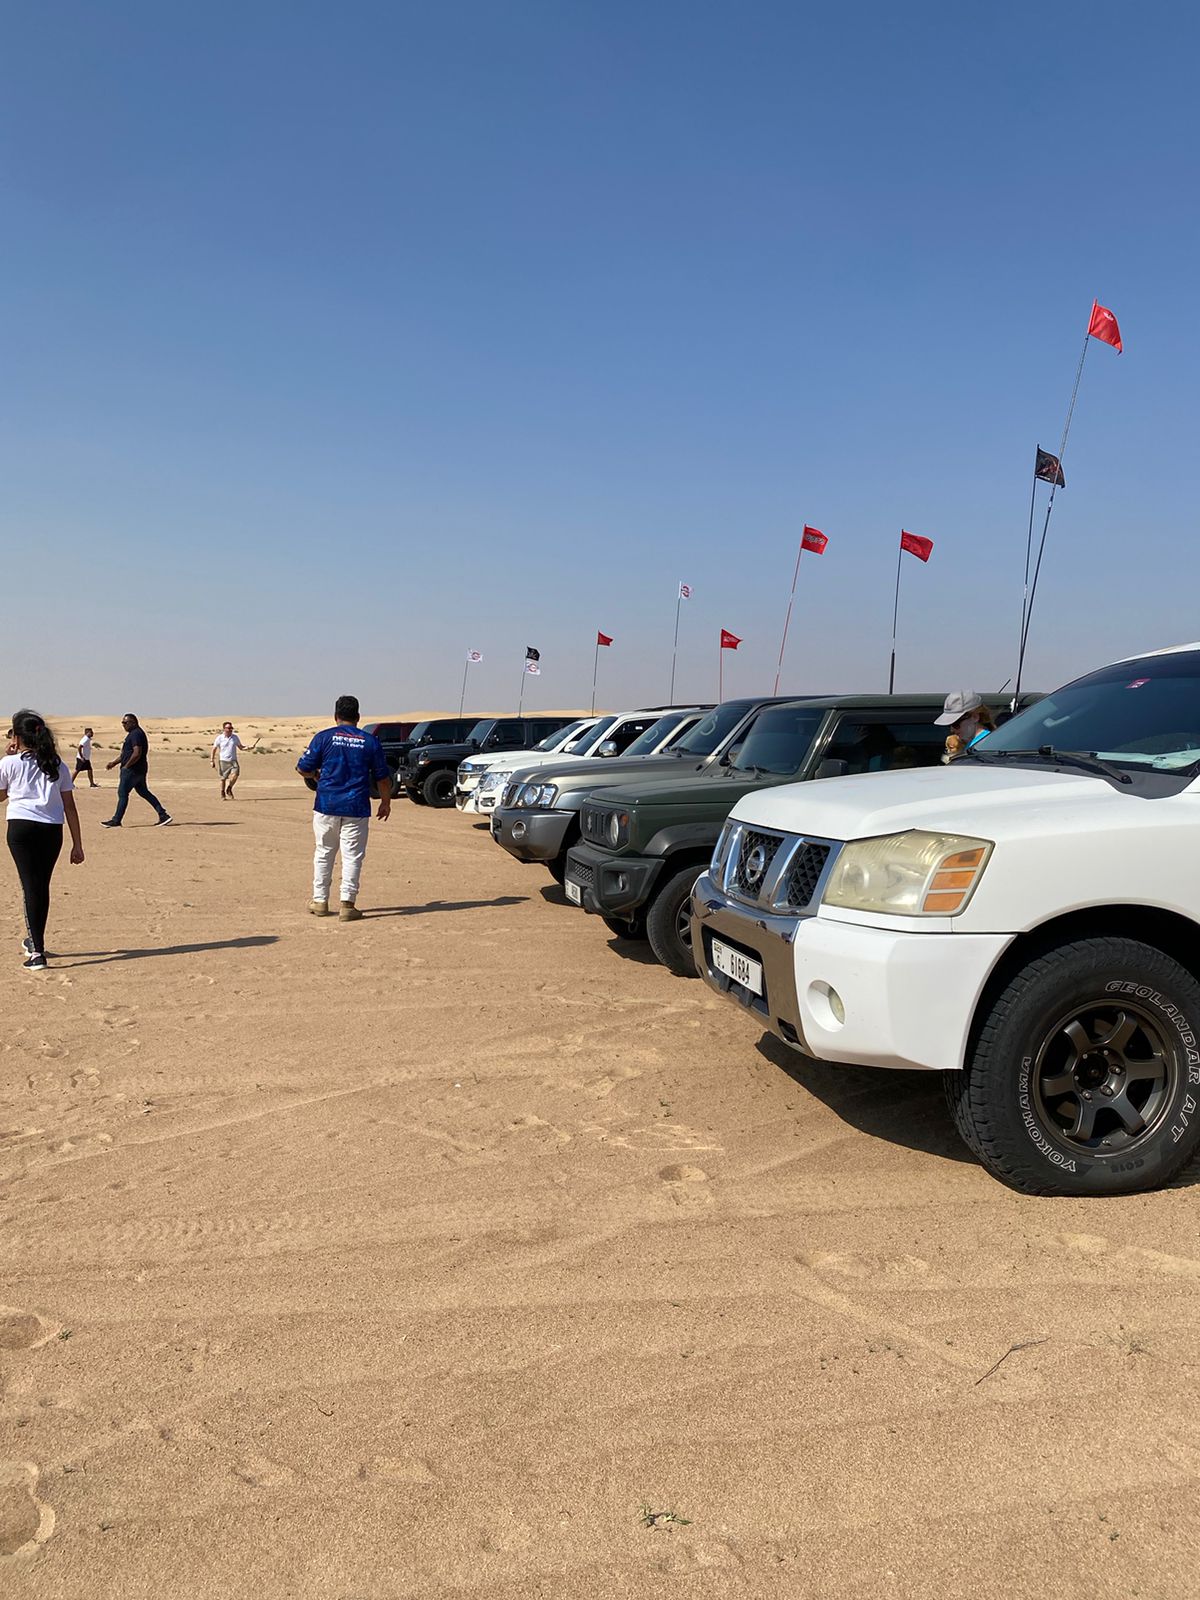 ALL LEVEL AFTERNOON DESERT DRIVE ON SATURDAY, THE 1st OF APRIL ‘2023